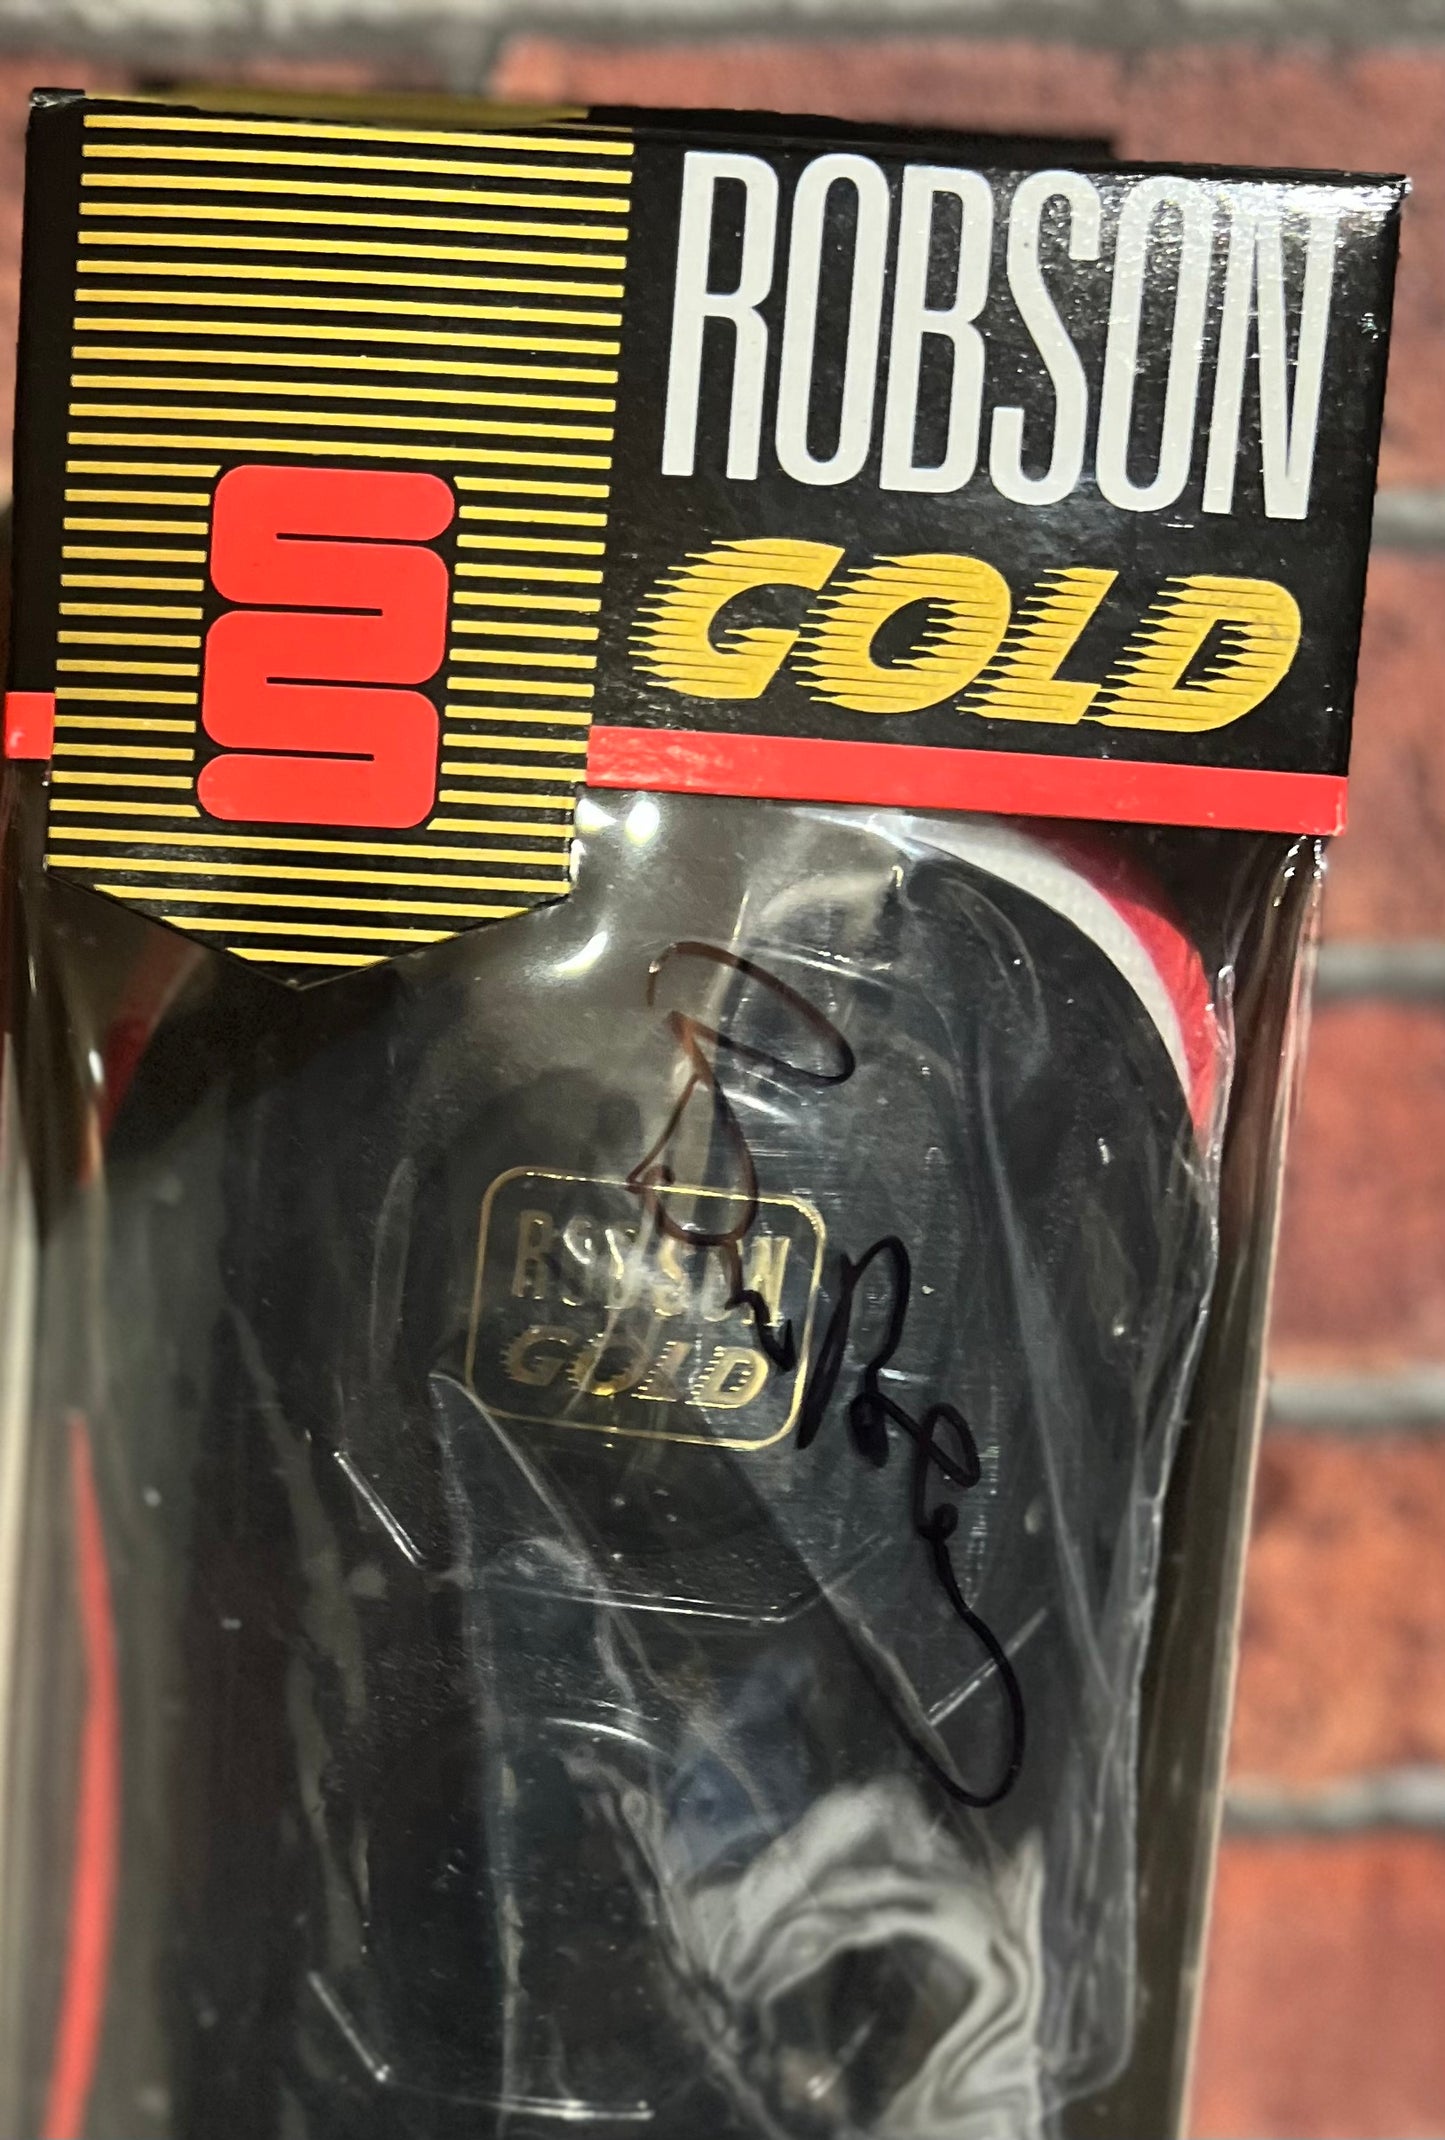 Featured Product: Signed Bryan Robson “Robson Gold” Shinguards